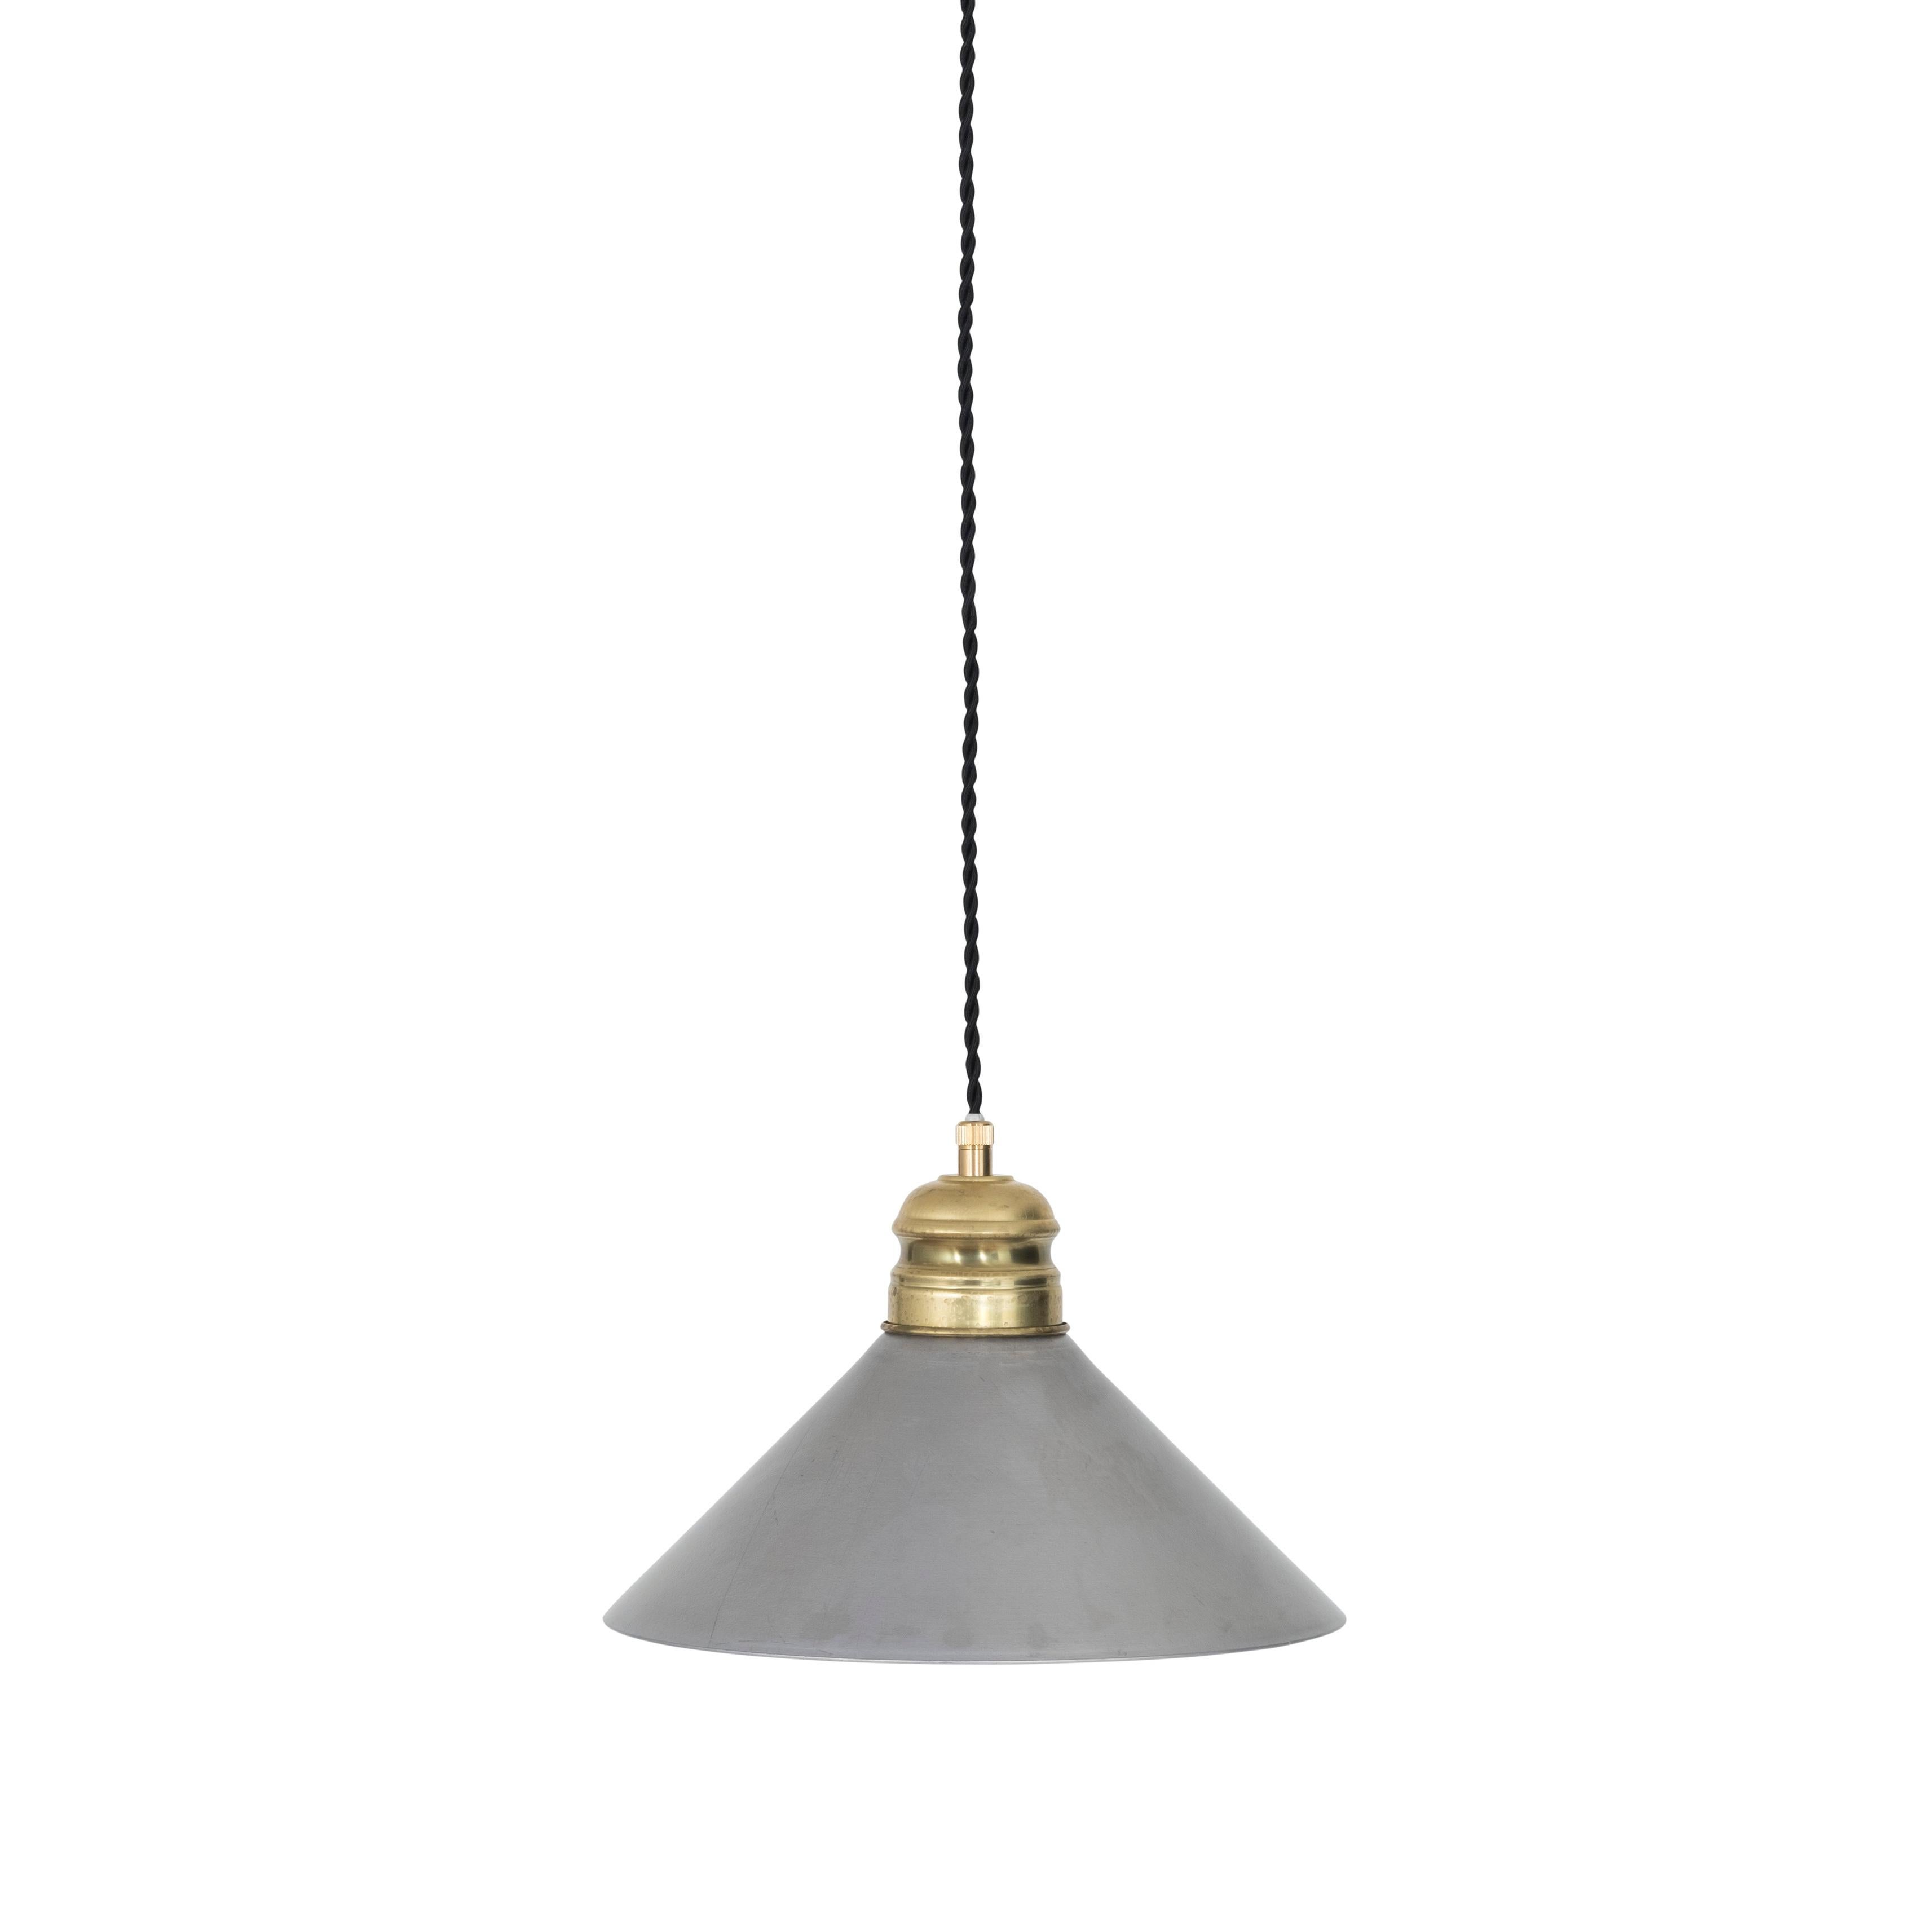 Rustik
Cord 1.5 m
Max 40 W E27
0054-5 shade raw alu
D. 250 mm

The lamps are wiring with standard Europe wiring.

The traditional Shoemaker's lamp in Konsthantverk's own vintage. A Classic in the kitchen with a timeless design. Shade and